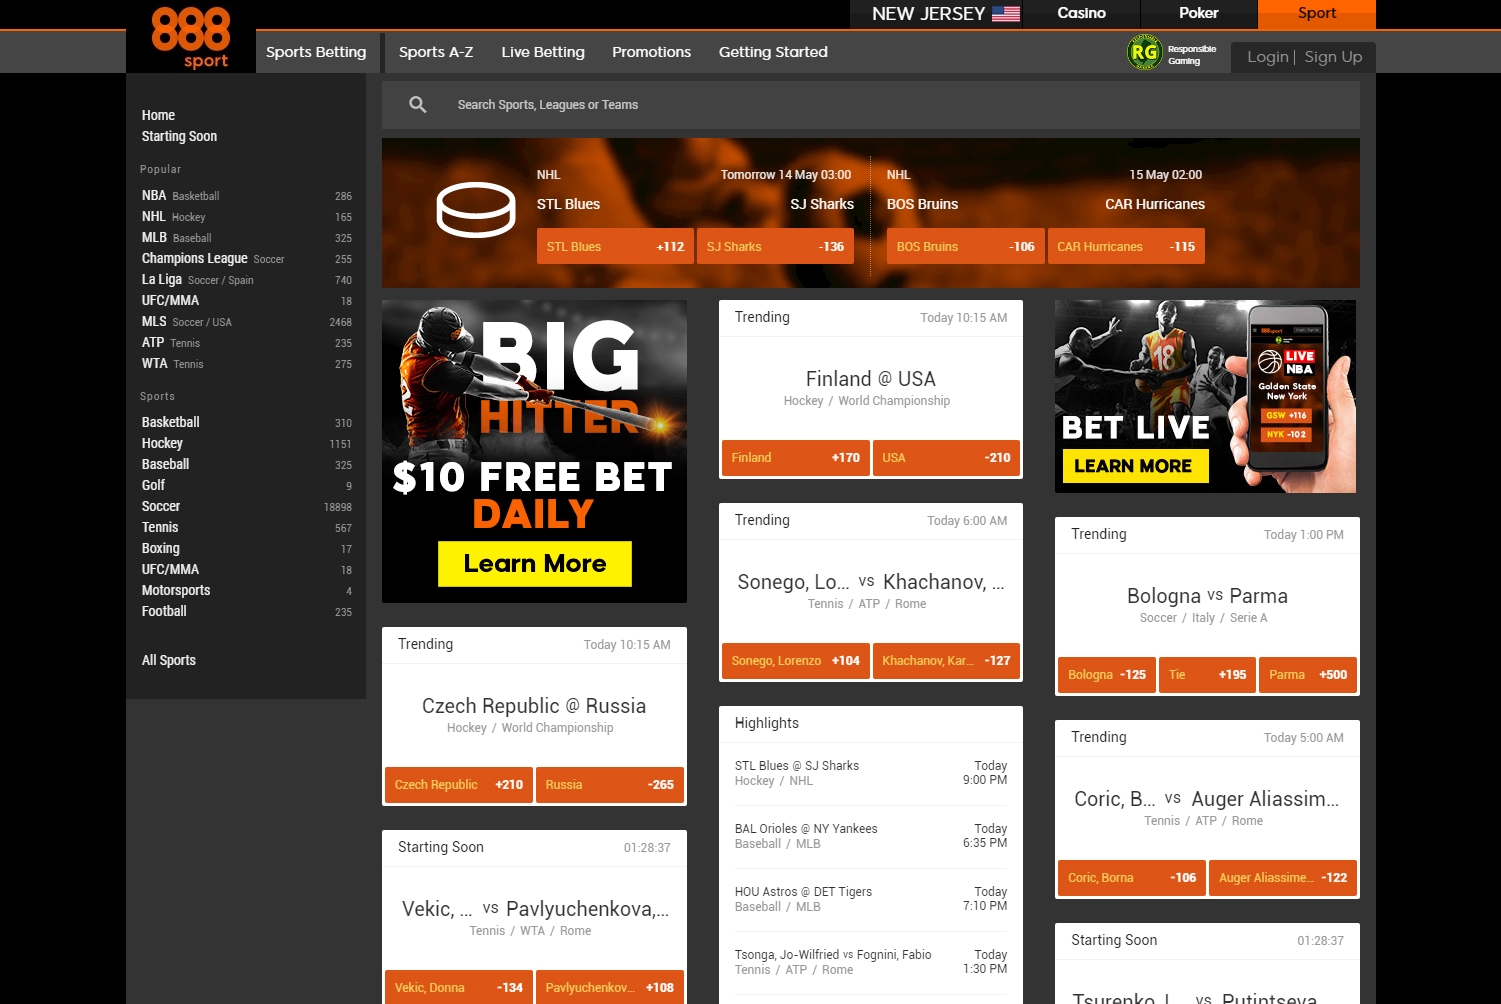 off track betting sites near me